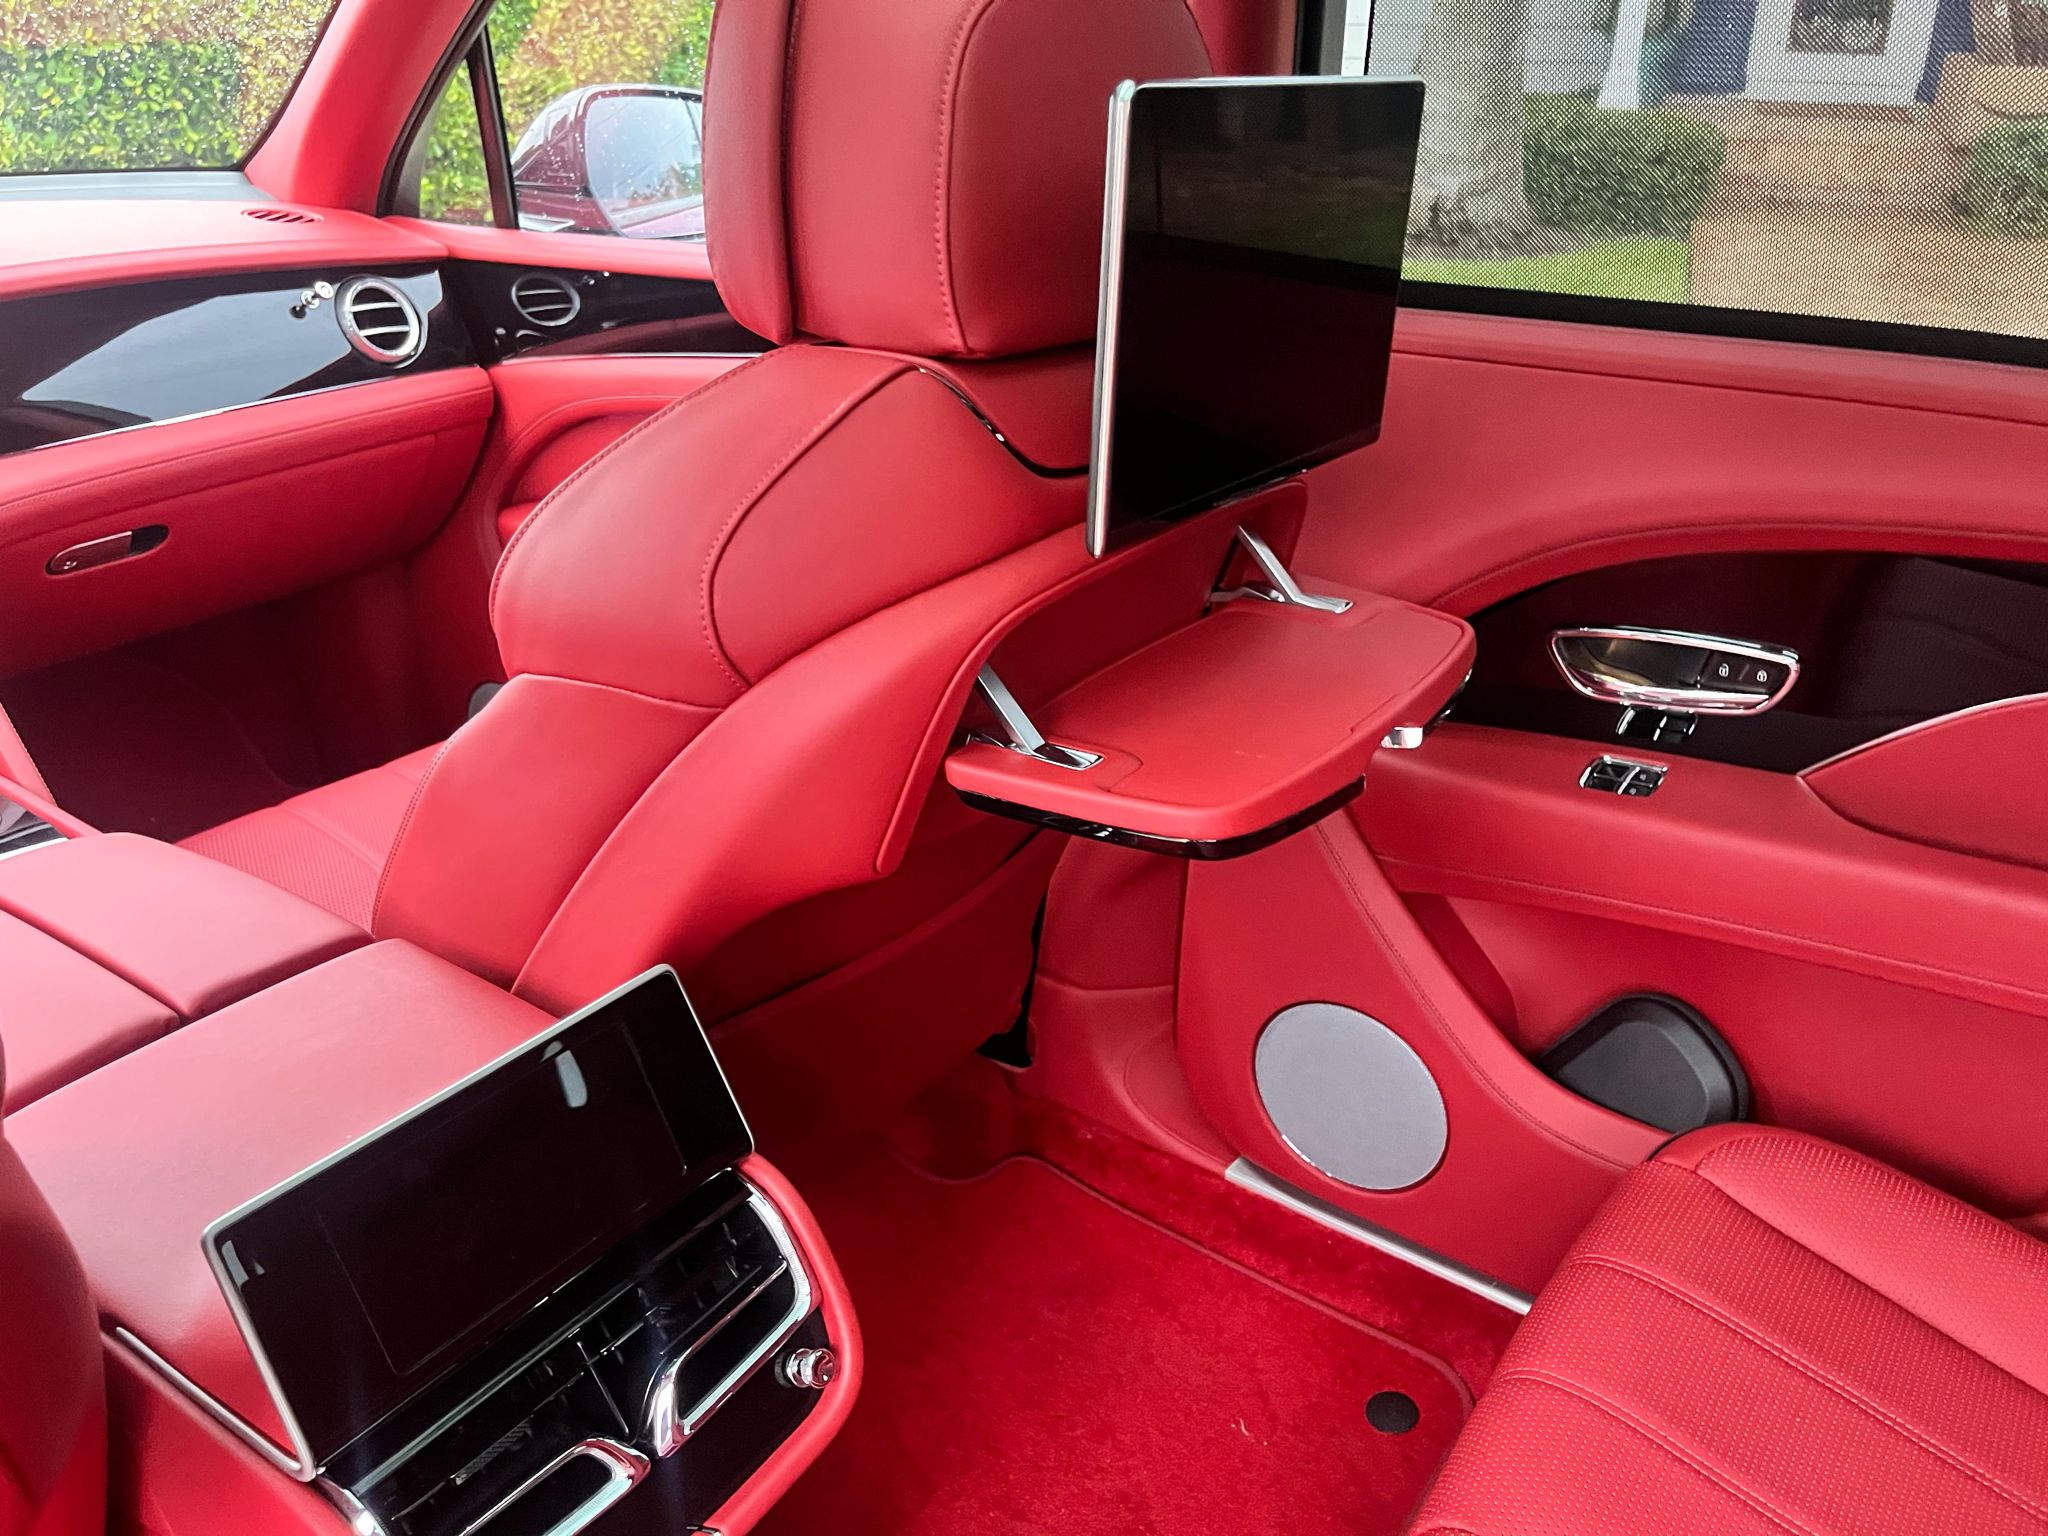 Bentley cars - inside, red style 2